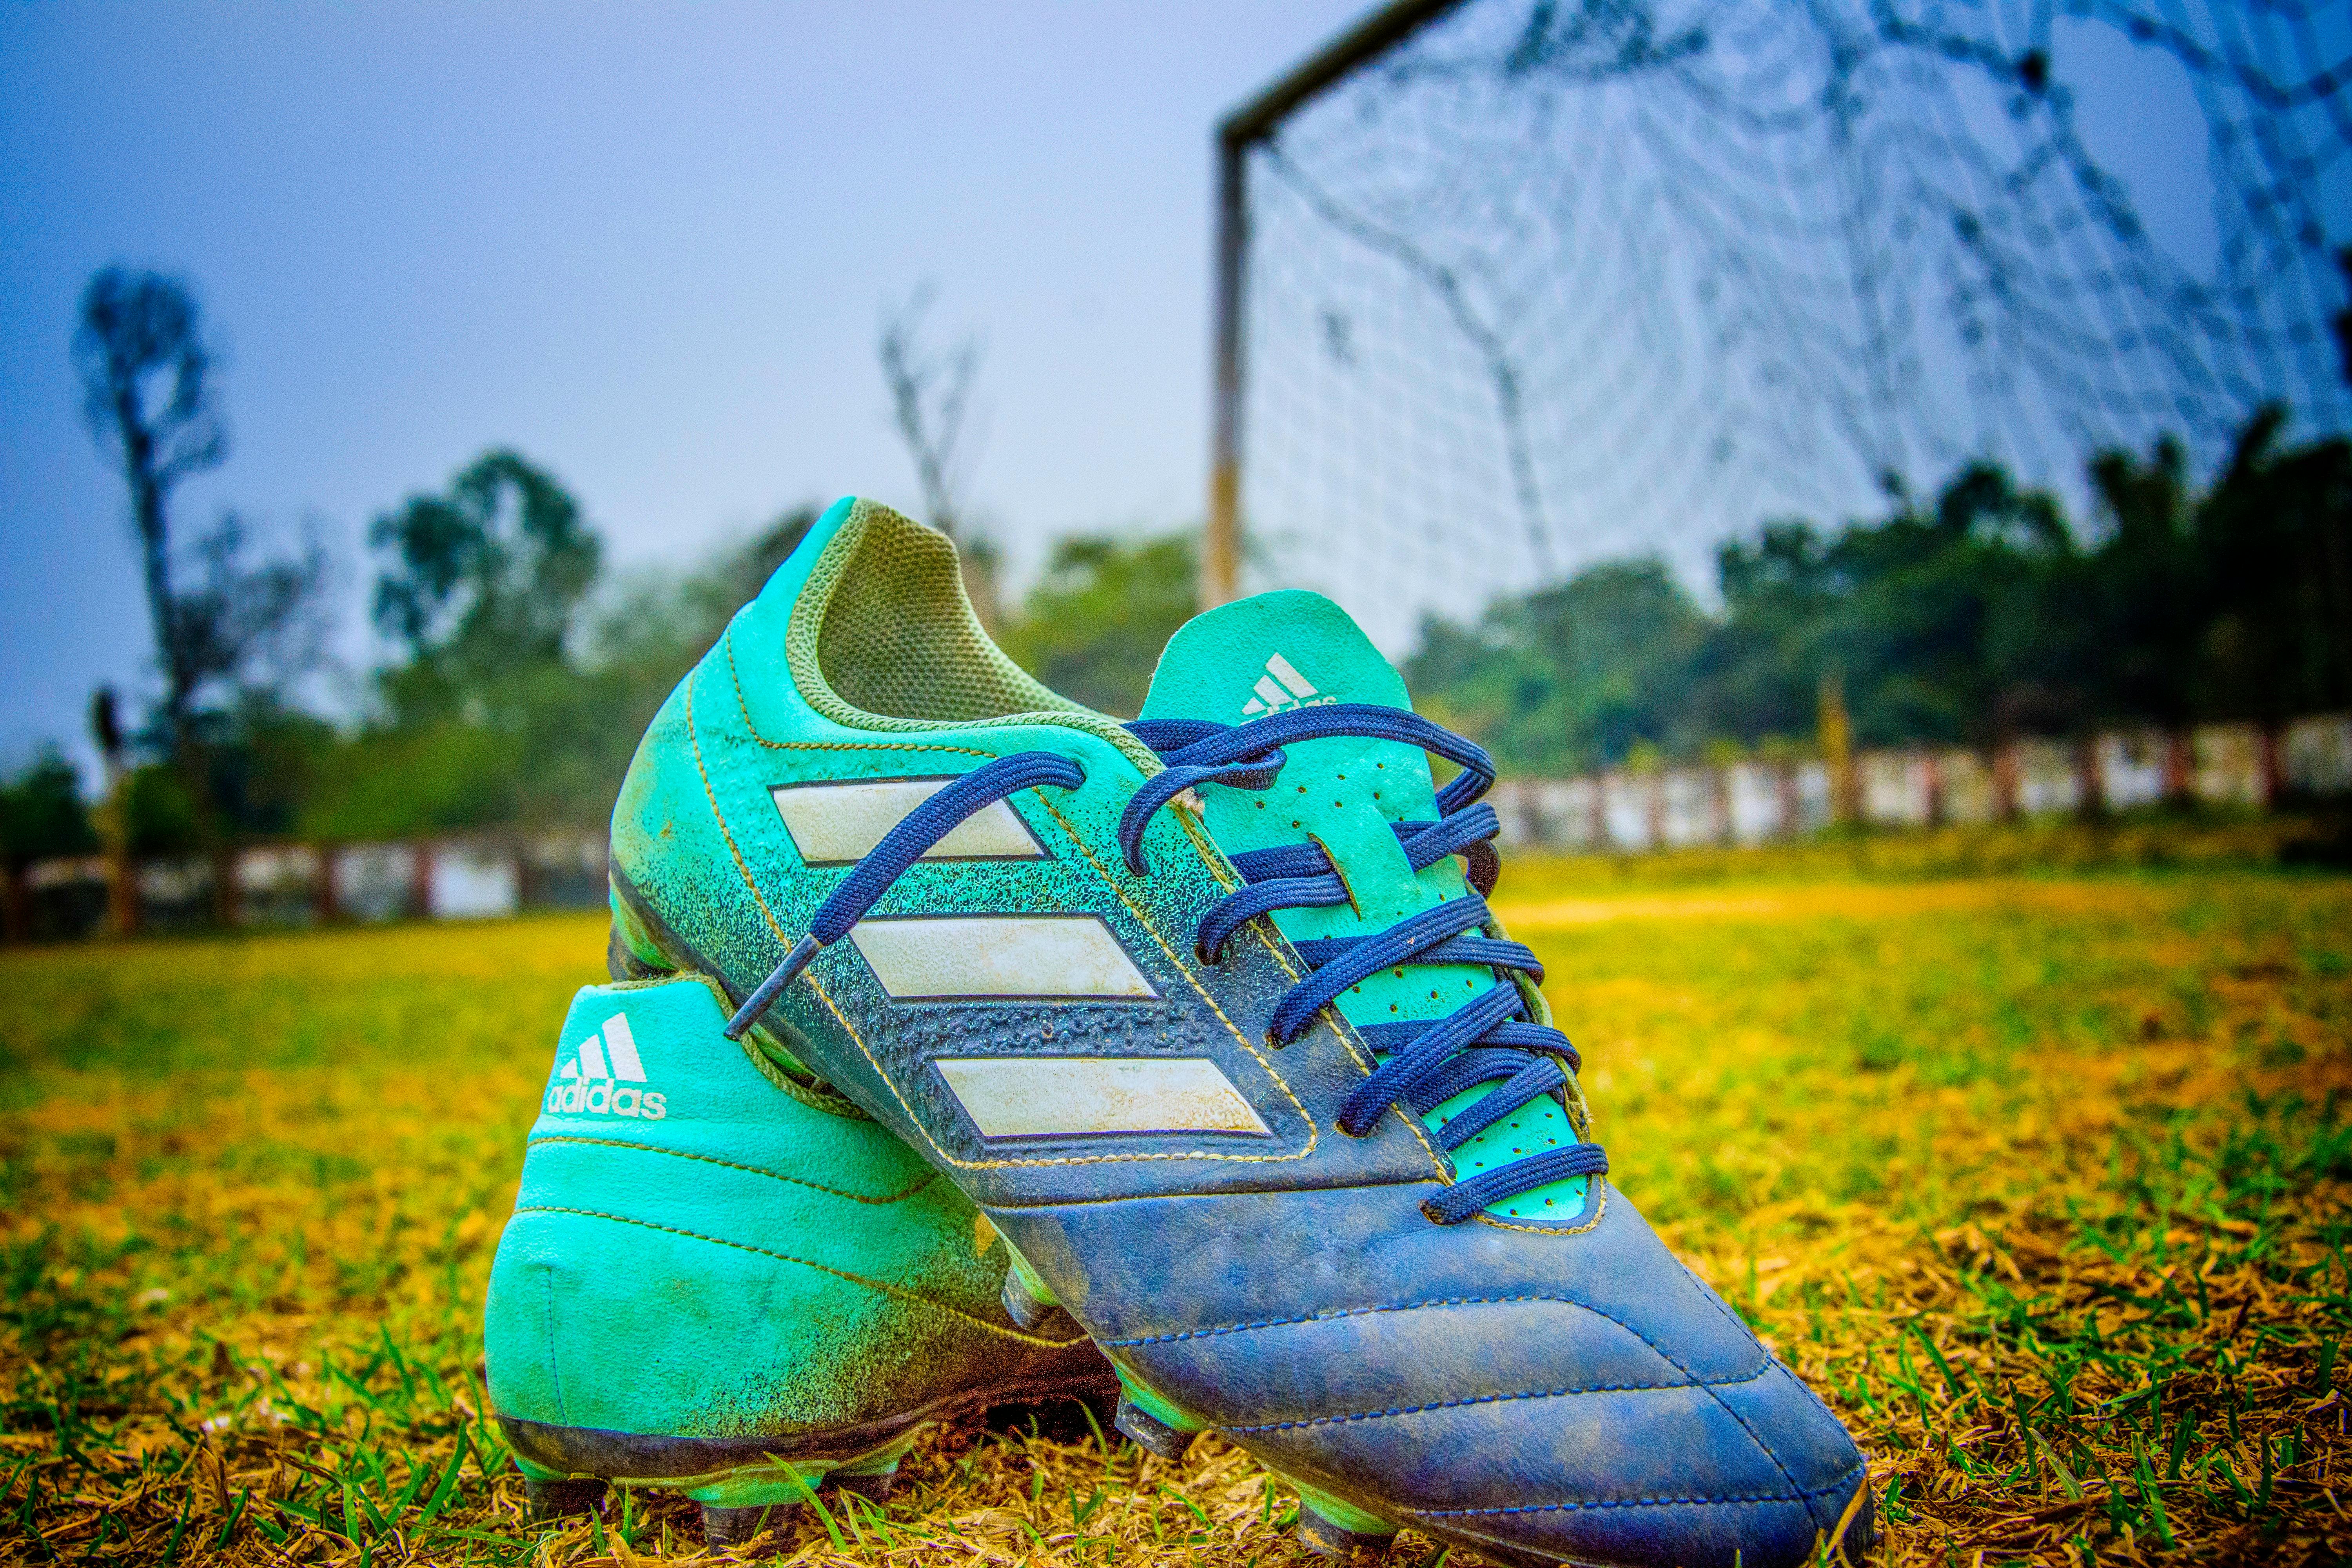 Free stock photo of Football shoes, pair of shoes, running shoes